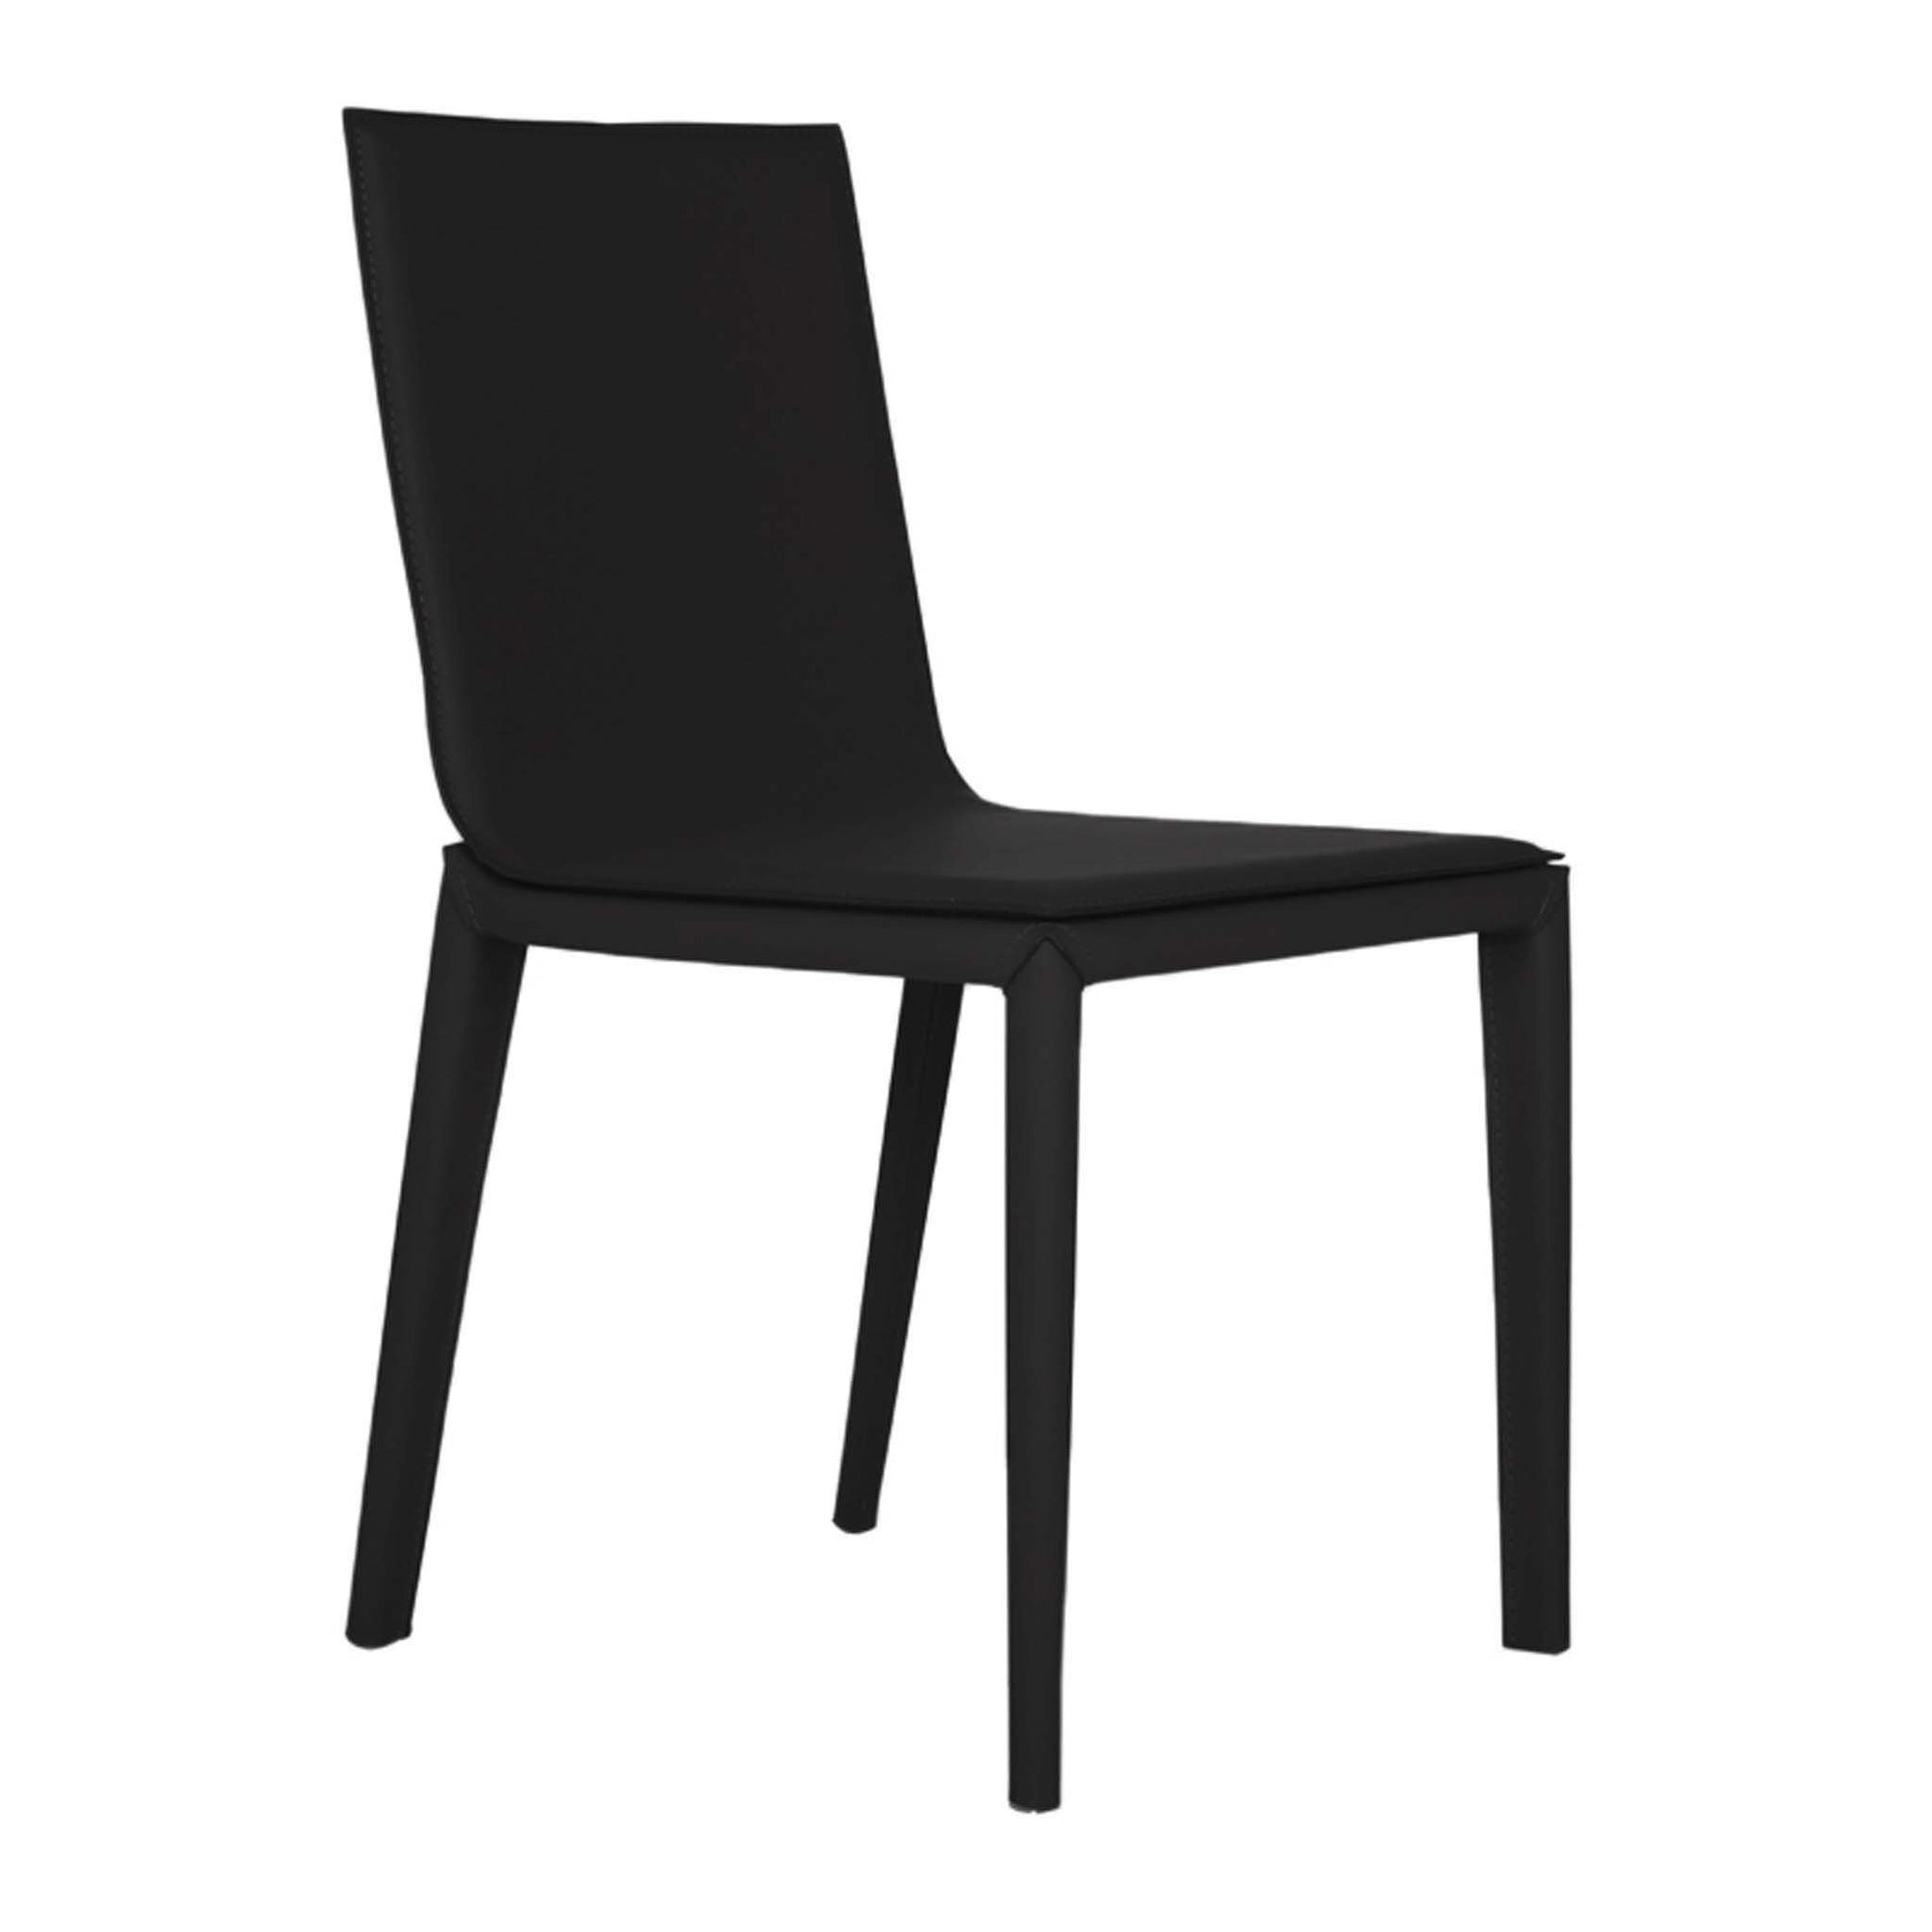 Bellini-Cherie Dining Chair-Dining Chairs-MODTEMPO